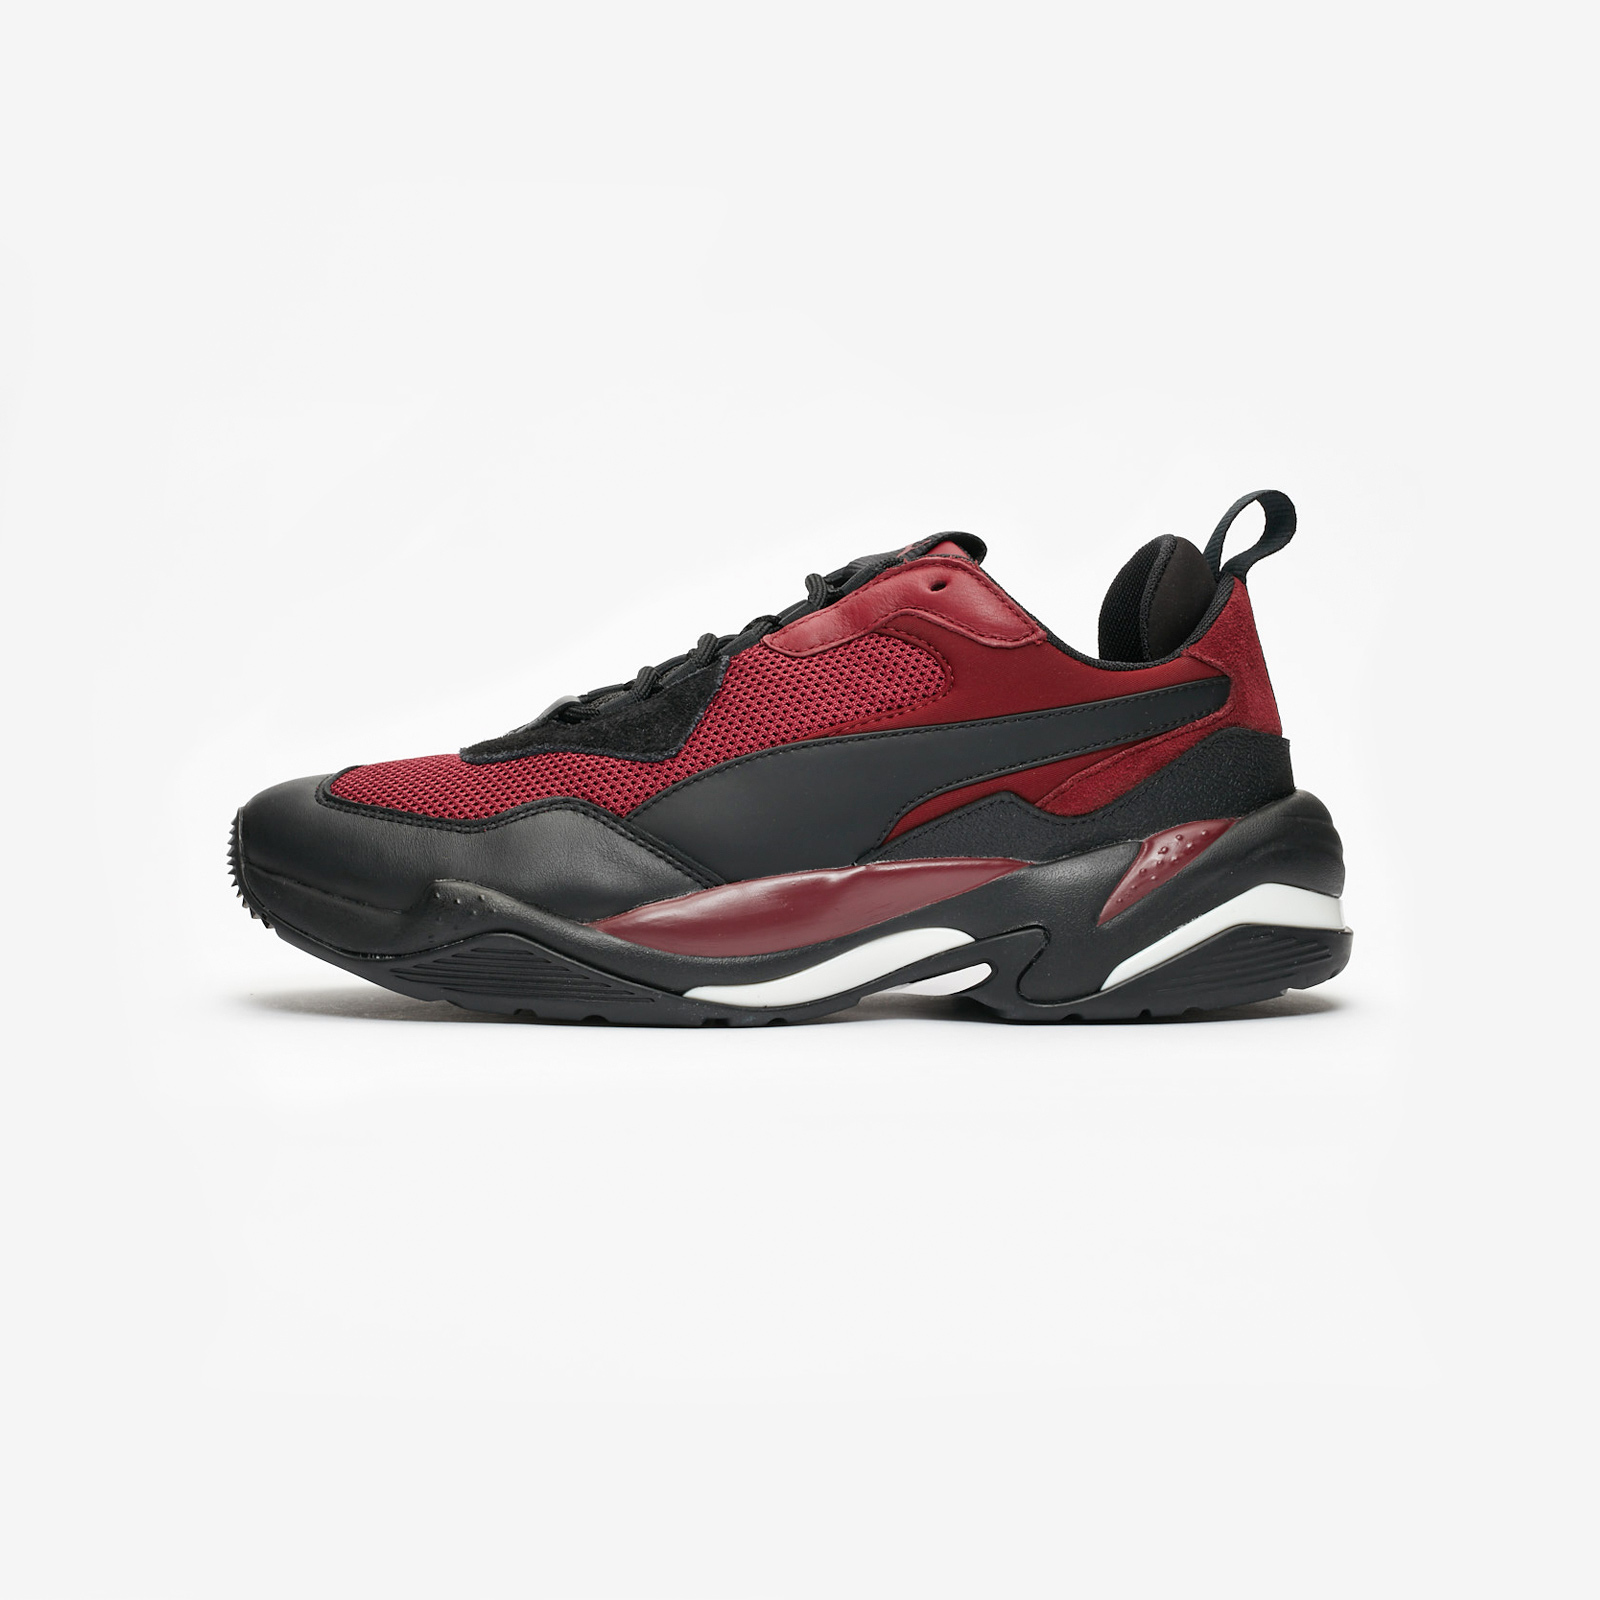 puma thunder spectra Rhododendron